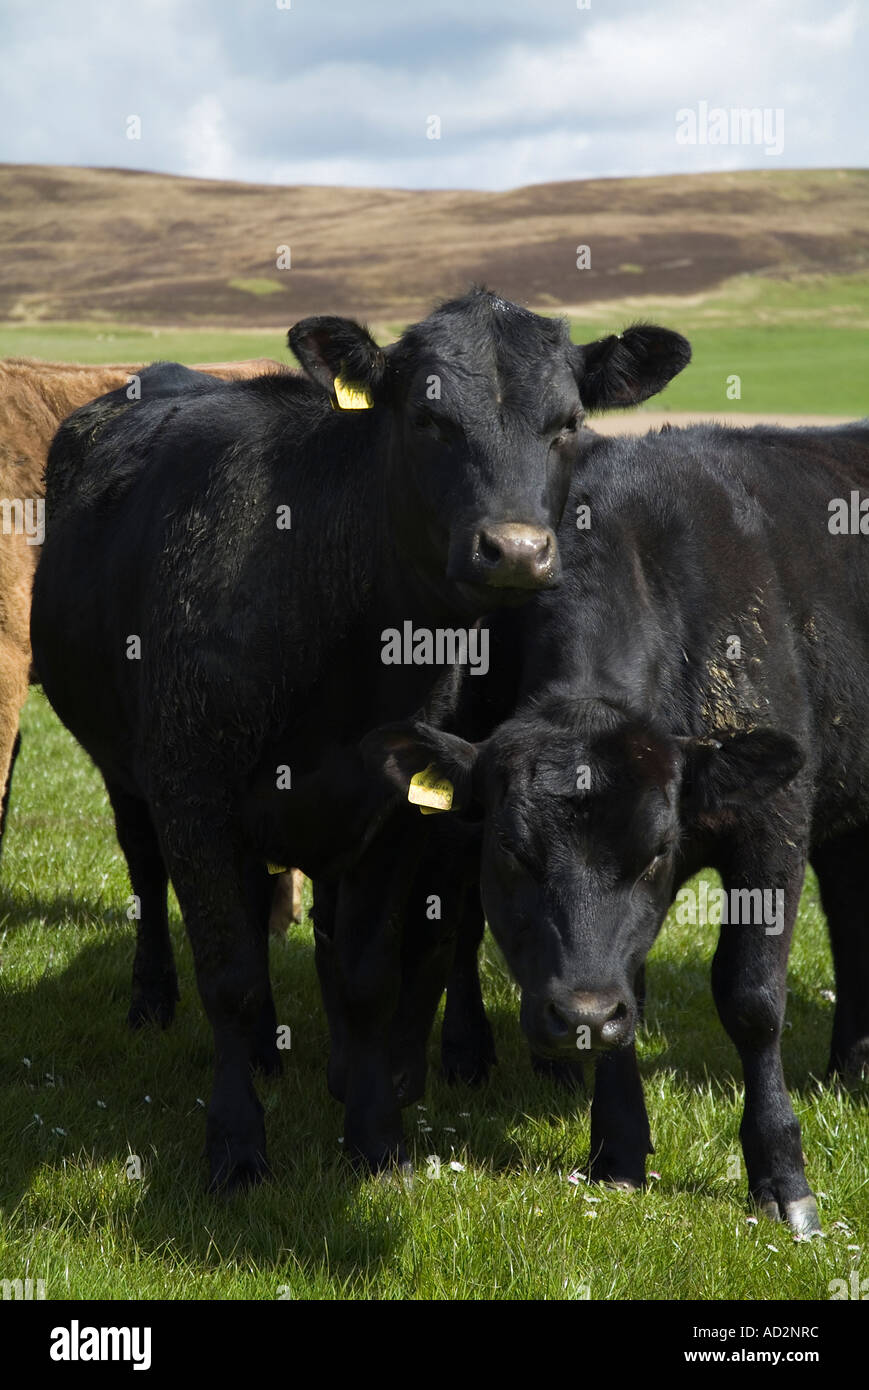 dh Aberdeen Angus Beef cows CATTLE SCOTLAND Young black bullock cow in field Orphir Orkney farm animals scottish bullocks uk Stock Photo